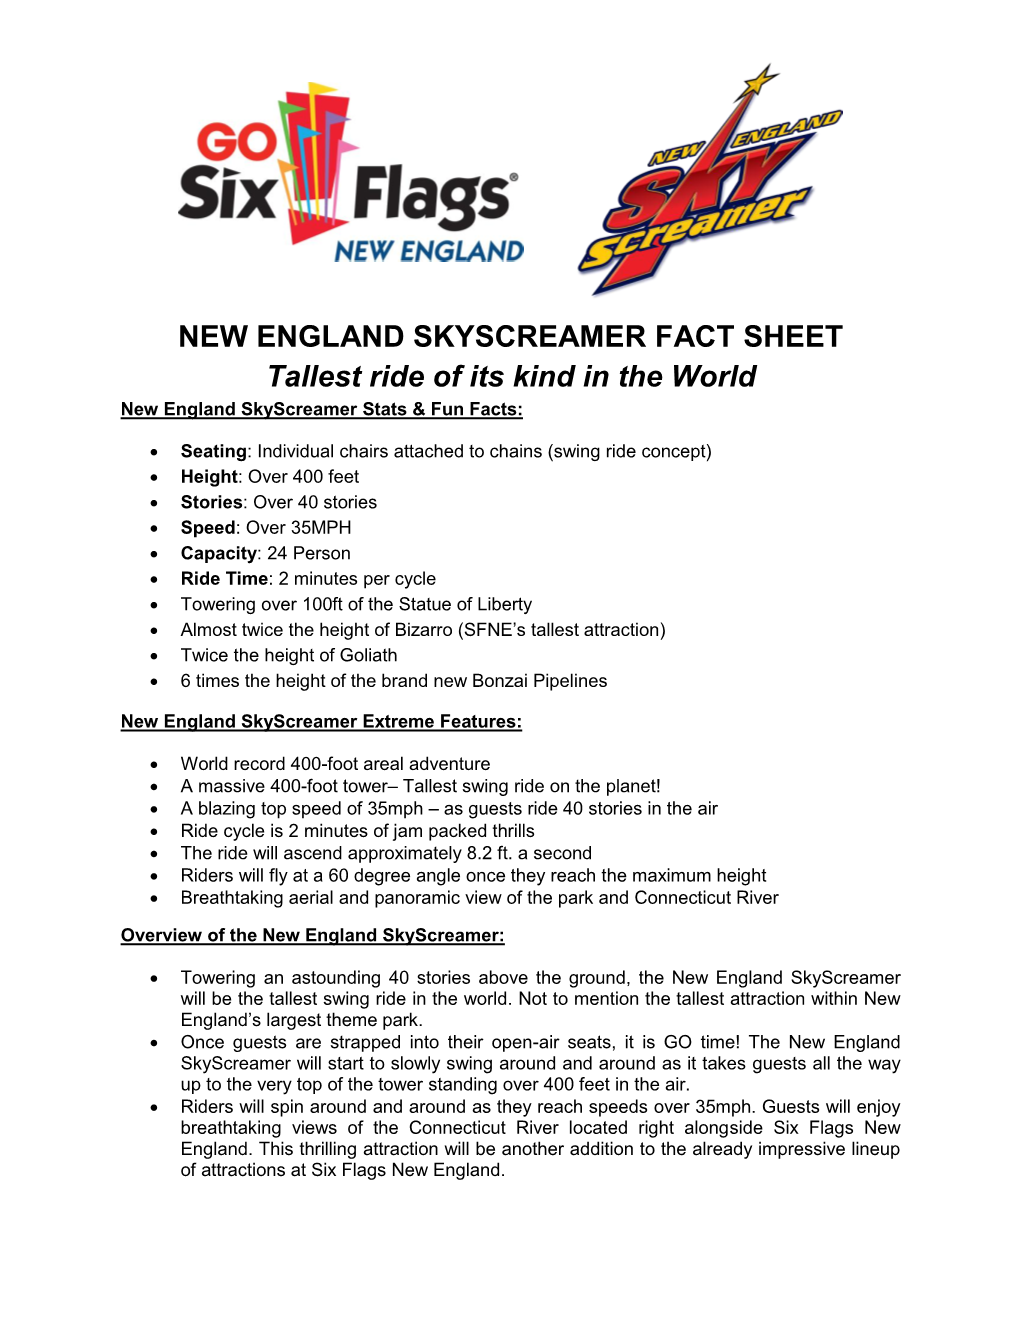 NEW ENGLAND SKYSCREAMER FACT SHEET Tallest Ride of Its Kind in the World New England Skyscreamer Stats & Fun Facts